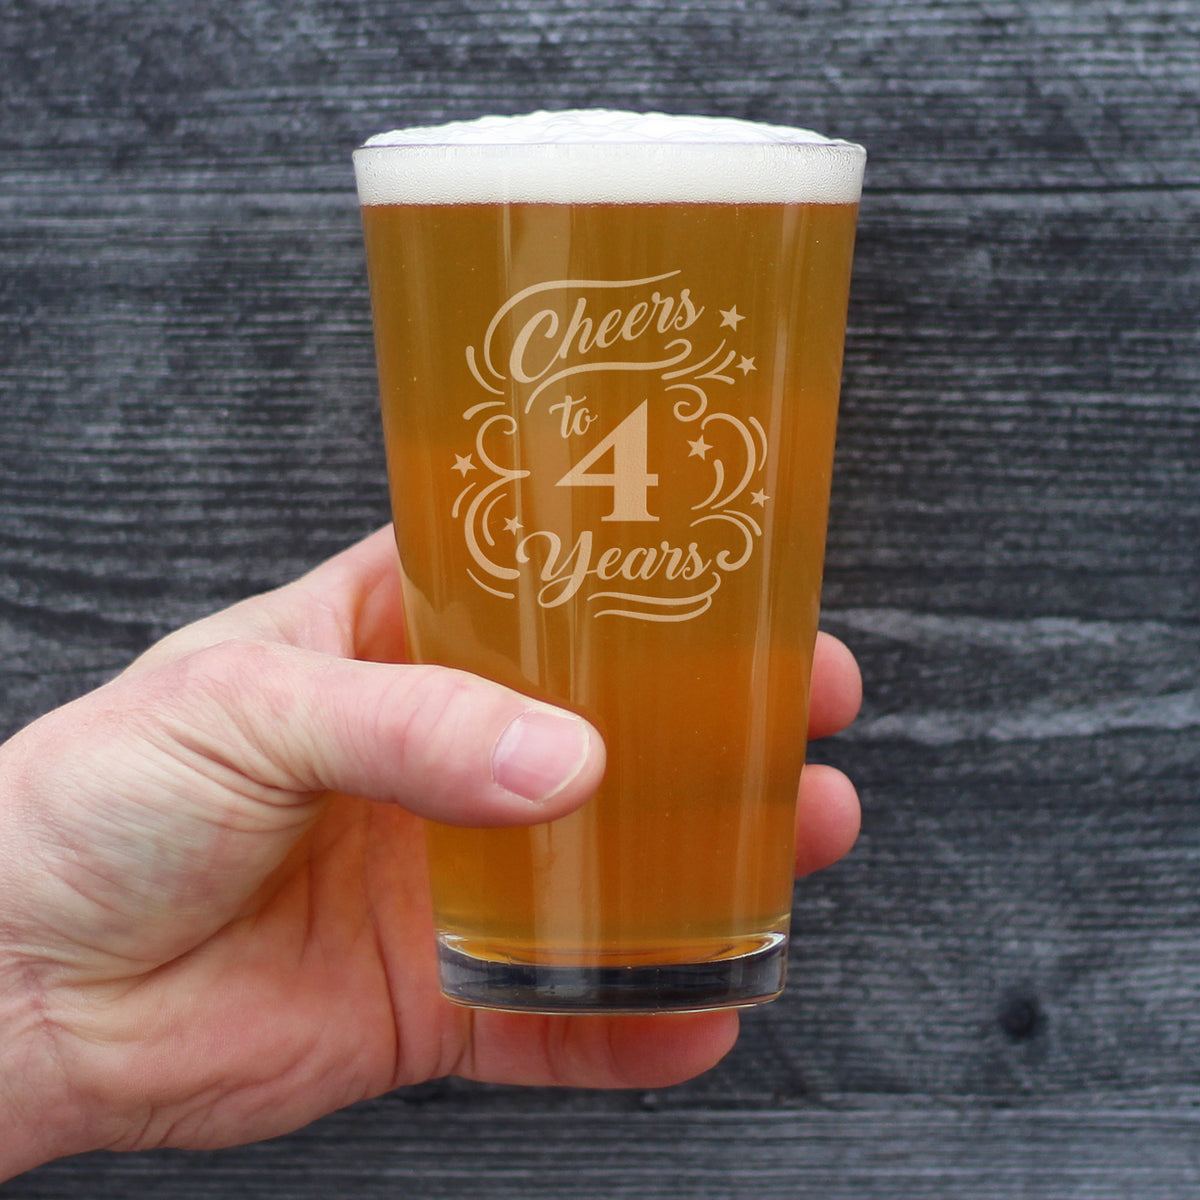 Cheers to 4 Years - Pint Glass for Beer - Gifts for Women &amp; Men - 4th Anniversary Party Decor - 16 Oz Glasses